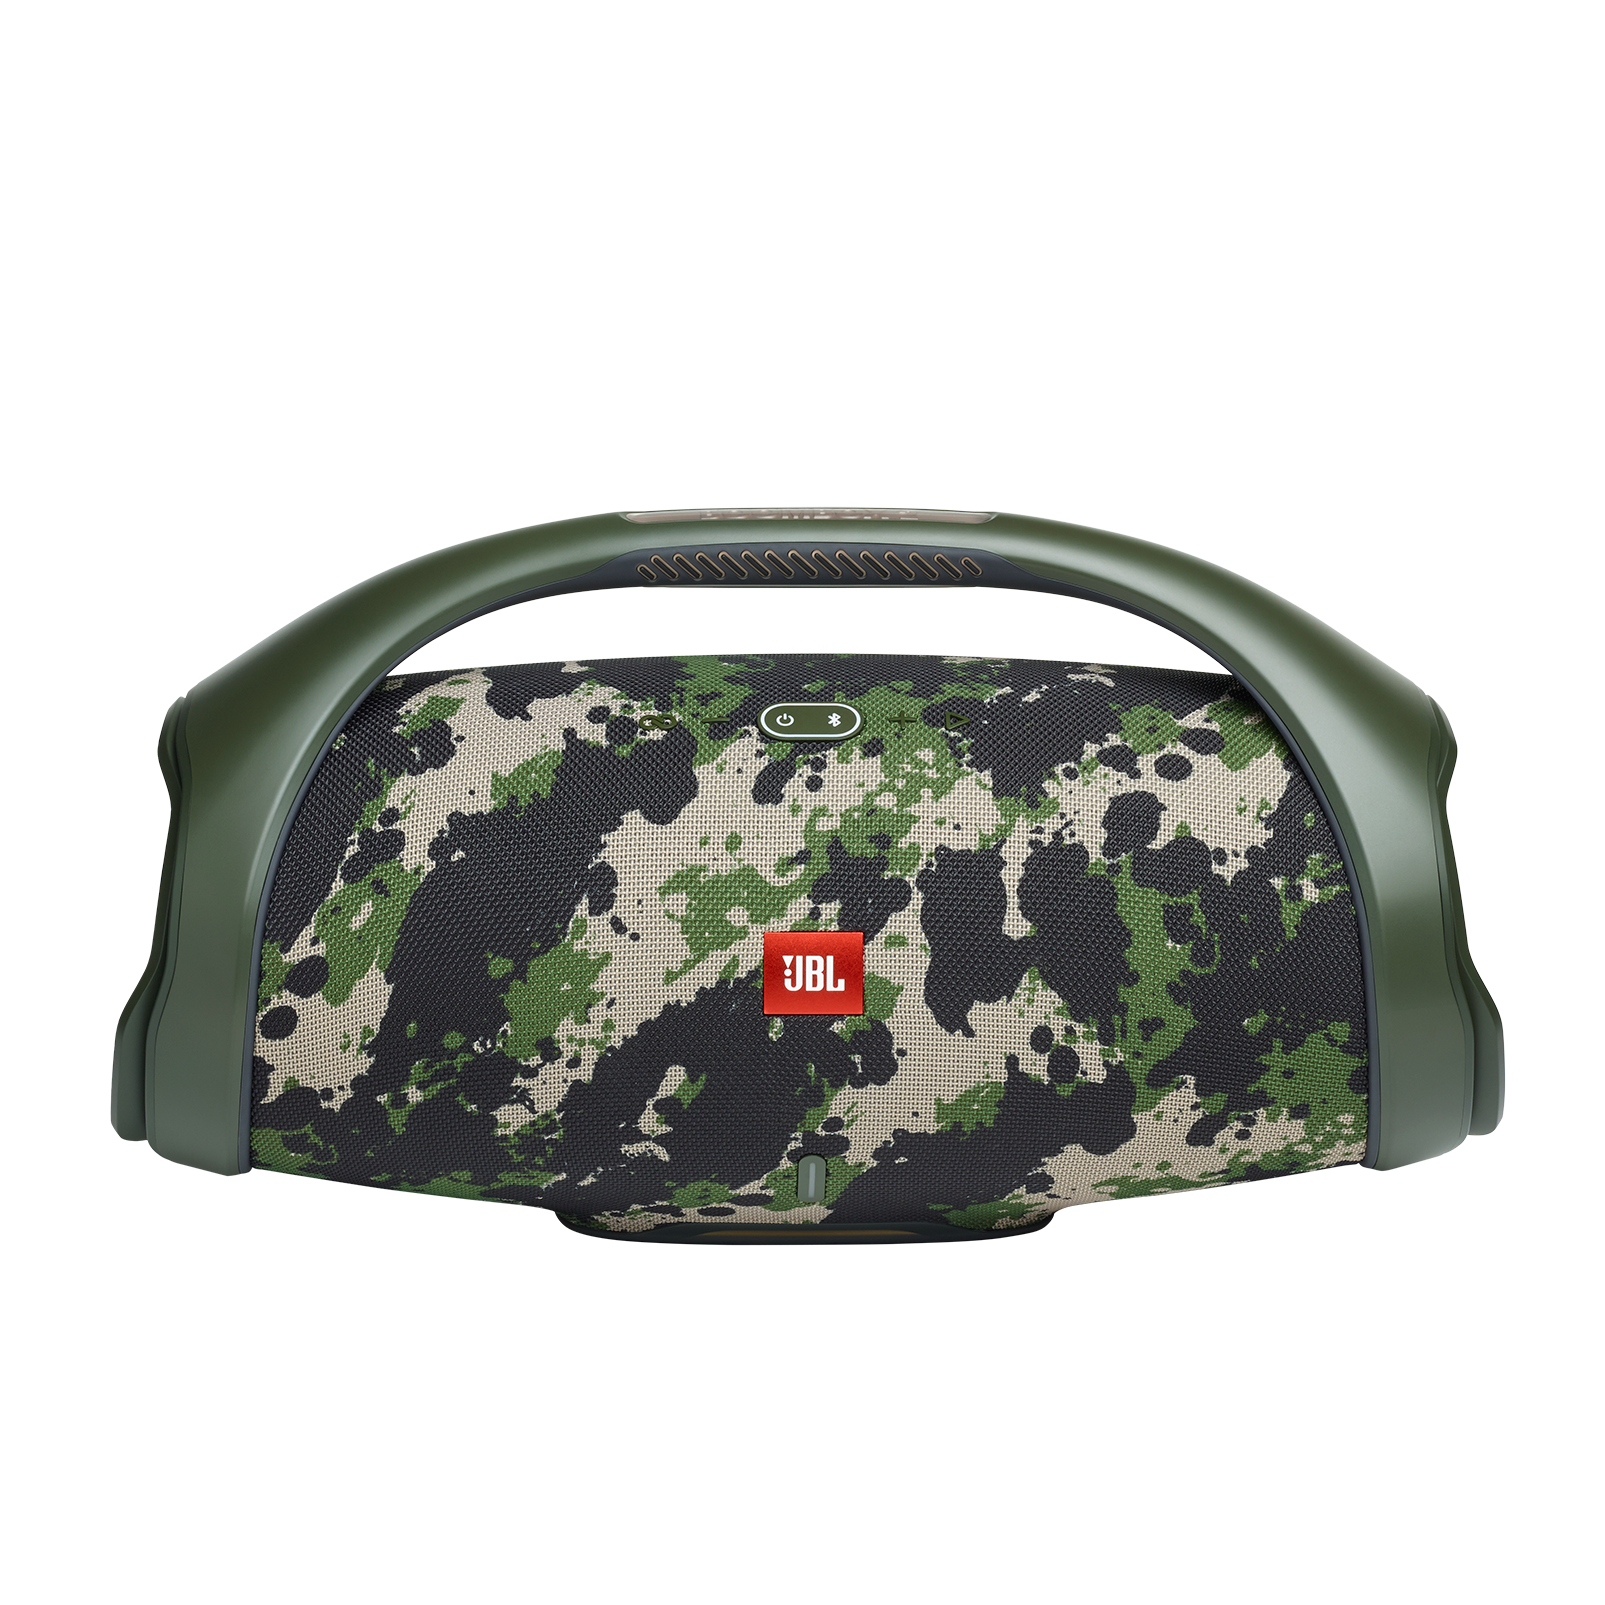 JBL Boombox 2 - Camouflage